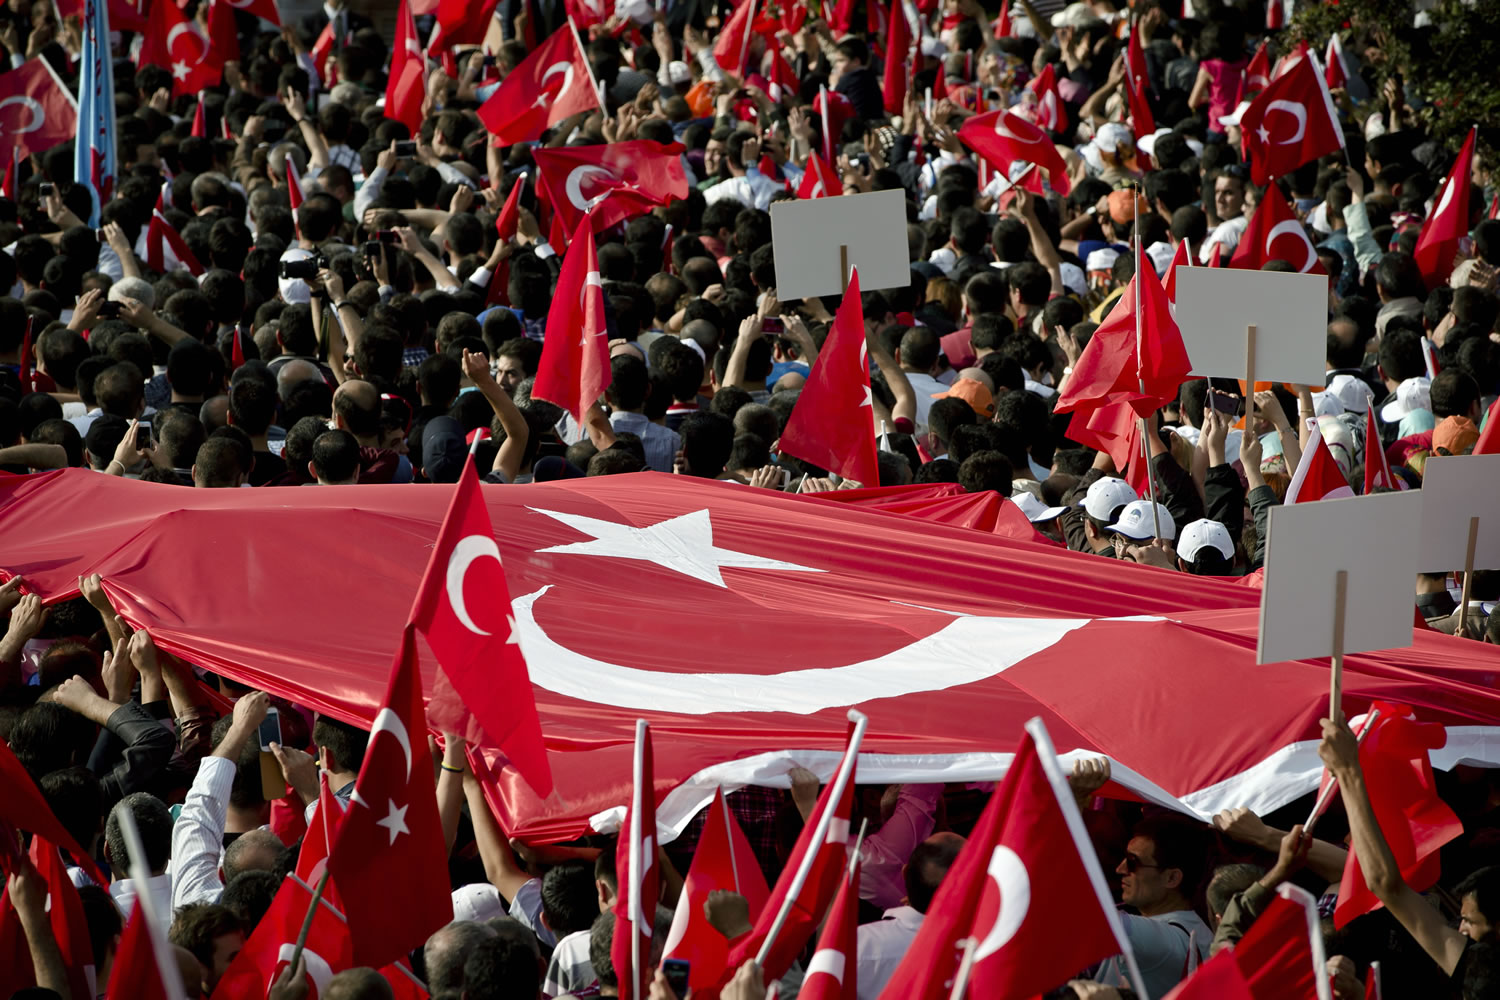 Supporters of Turkish Prime Minister Recep Tayyip Erdogan carry a large Turkish flag Sunday during his speech in Ankara, Turkey.